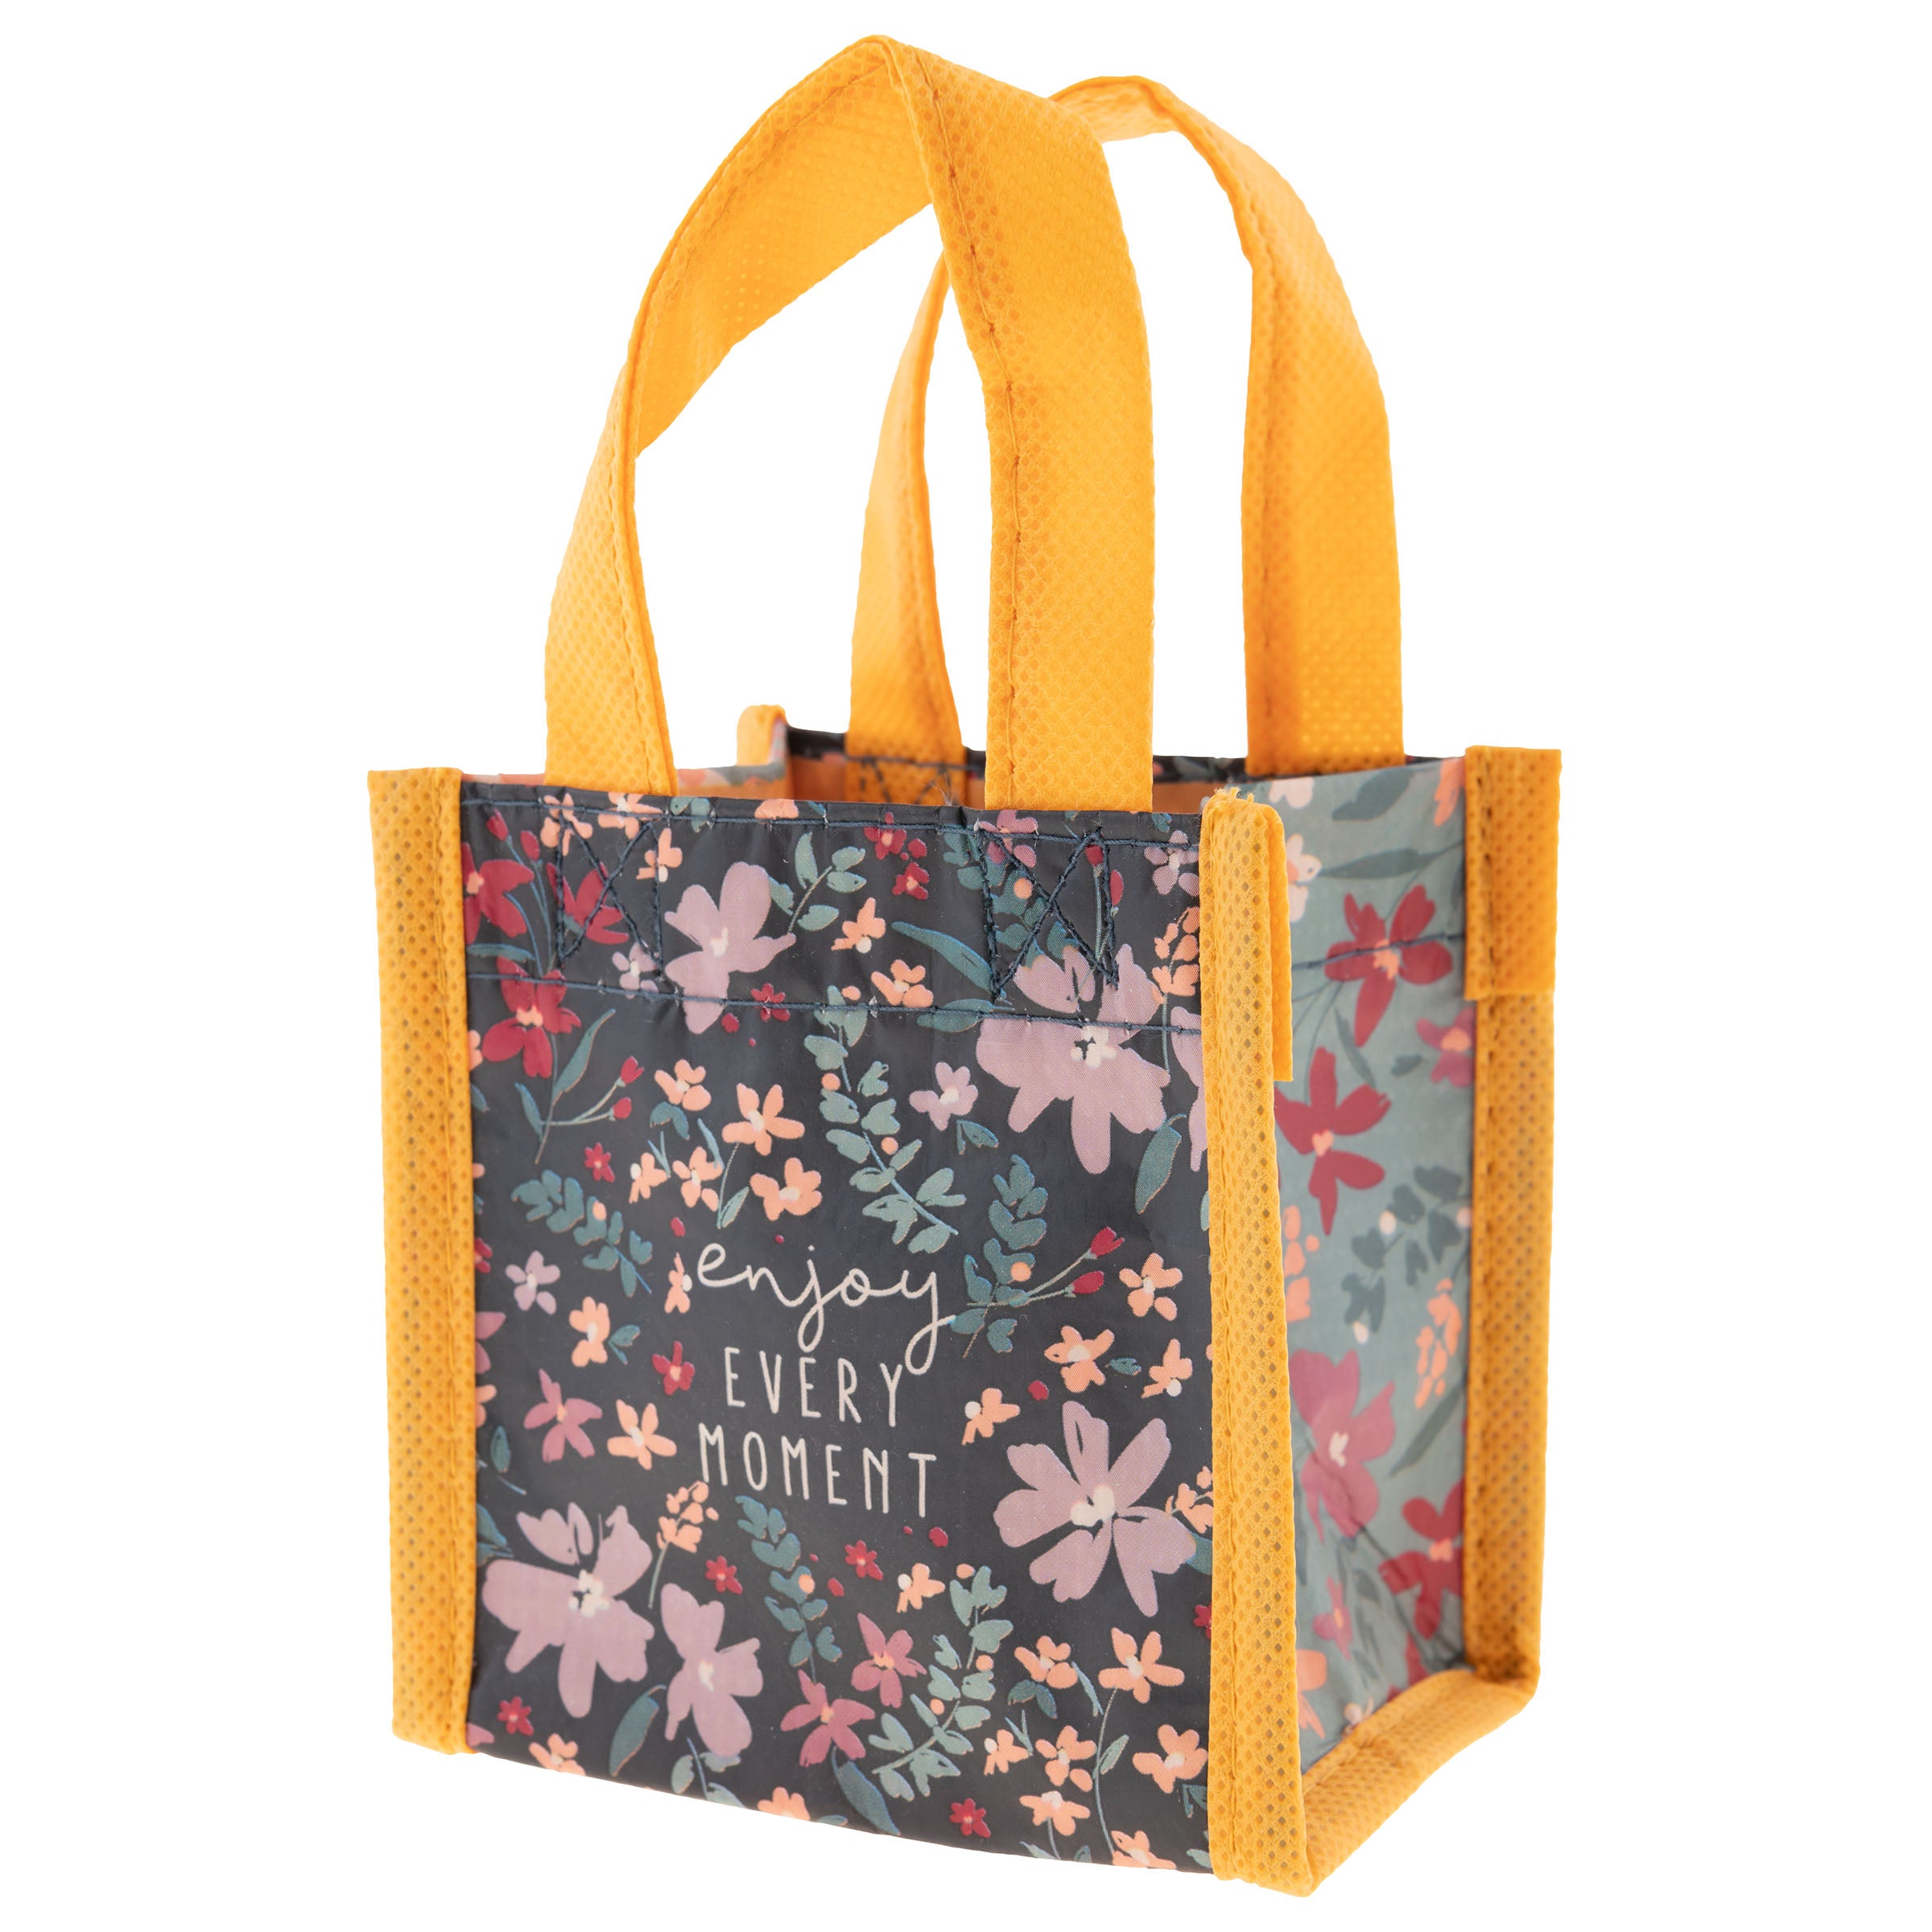 Flower Illustration Canvas Tote Bag (Yellow / Blue / Olive